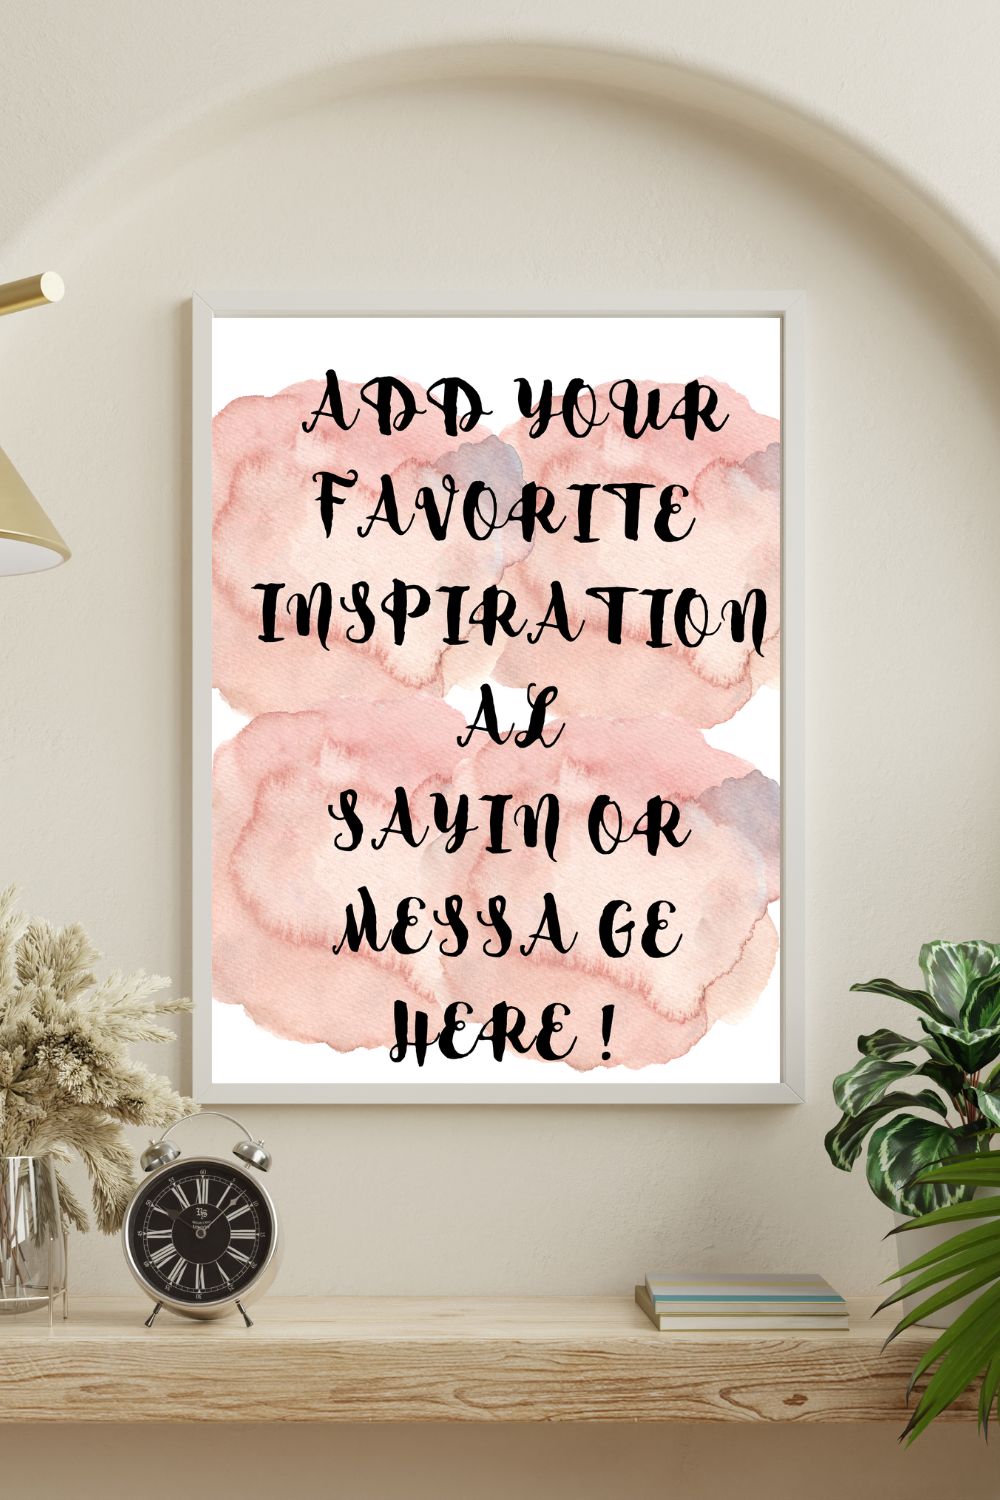 Motivational Quote Wall Art" "Words of Wisdom: Elegant Quote Wall Art Decor" "Positive Vibes Only: Stylish Quote Wall Art Collection" "Dream Big, Live Bold: Modern Typography Quote Wall Art" "Artistic Affirmations: Creative Quote Wall Art Prints" pinterest preview image.